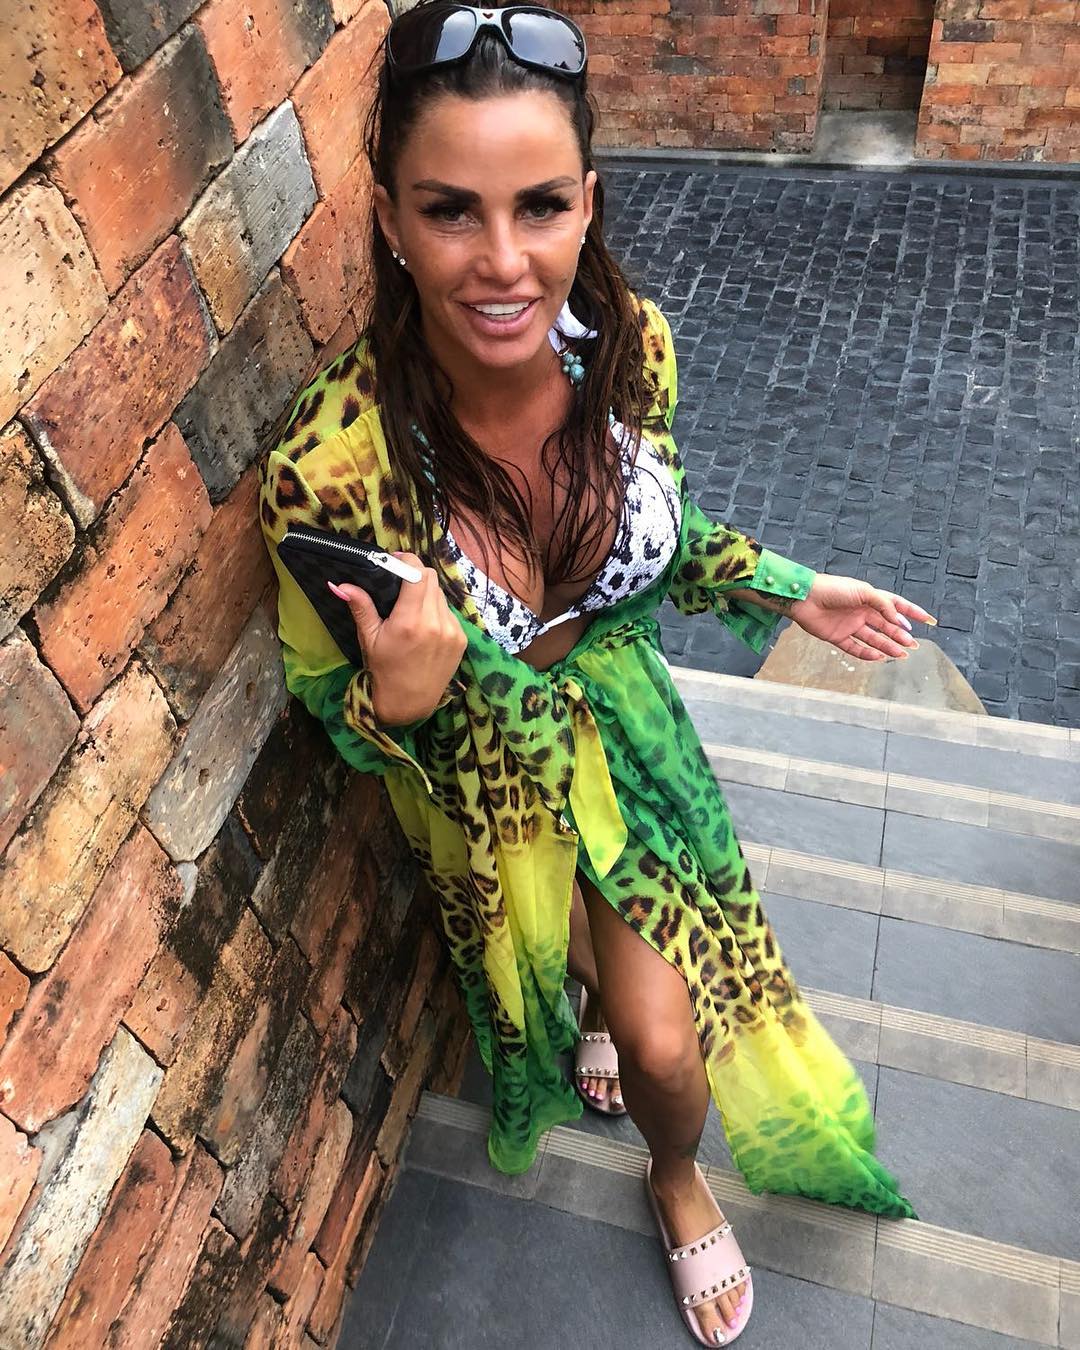 60+ Hot Pictures Of Katie Price Show Her Big Butt And Curvy Body | Best Of Comic Books